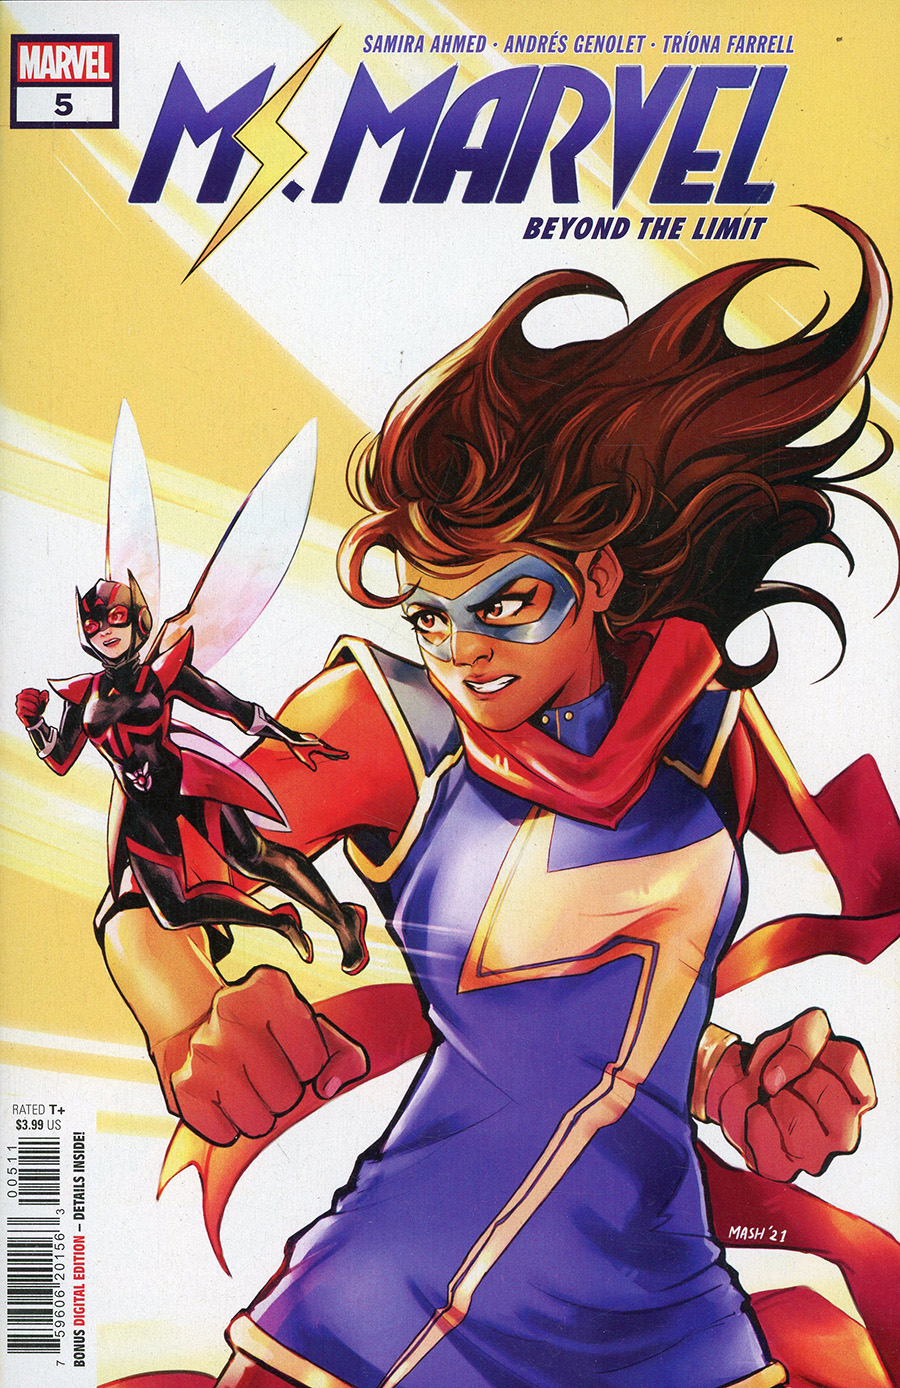 Ms Marvel Beyond The Limit #5 Cover A Regular Mashal Ahmed Cover